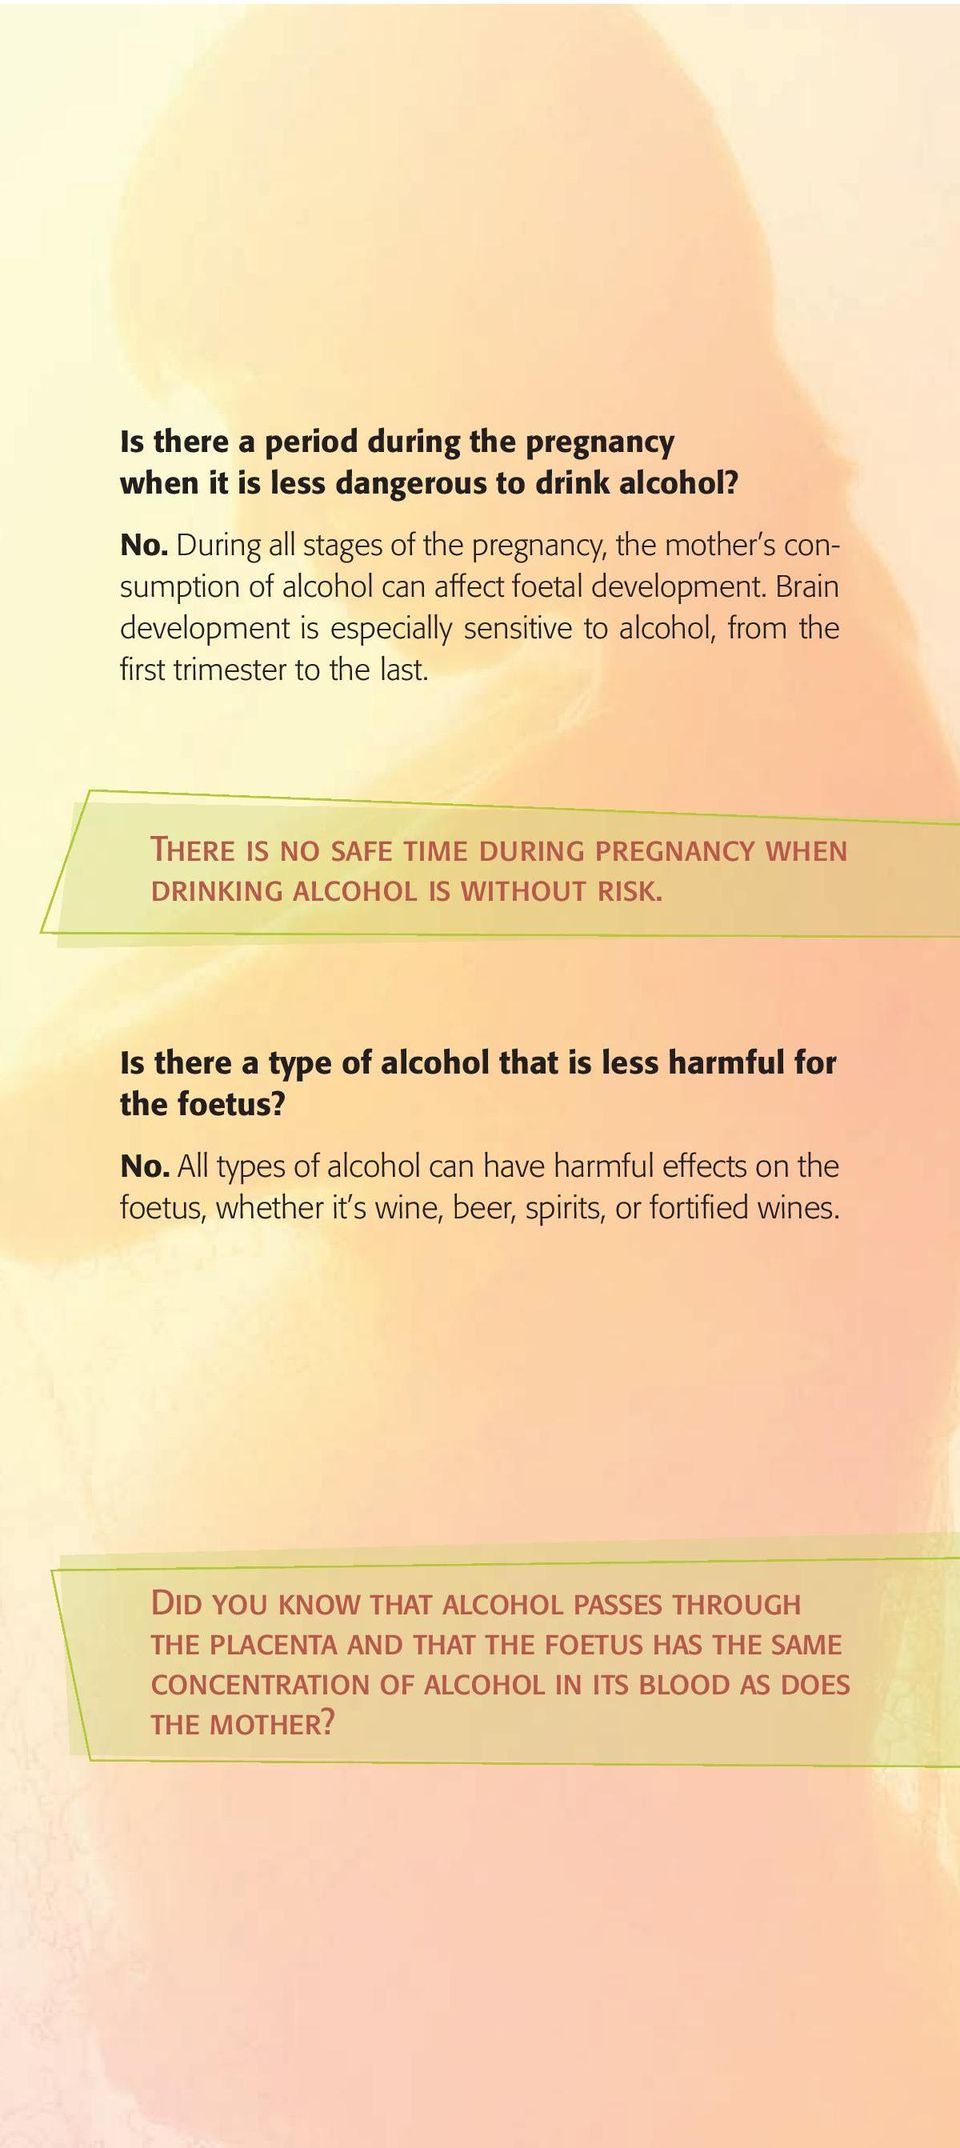 Brain development is especially sensitive to alcohol, from the first trimester to the last. There is no safe time during pregnancy when drinking alcohol is without risk.